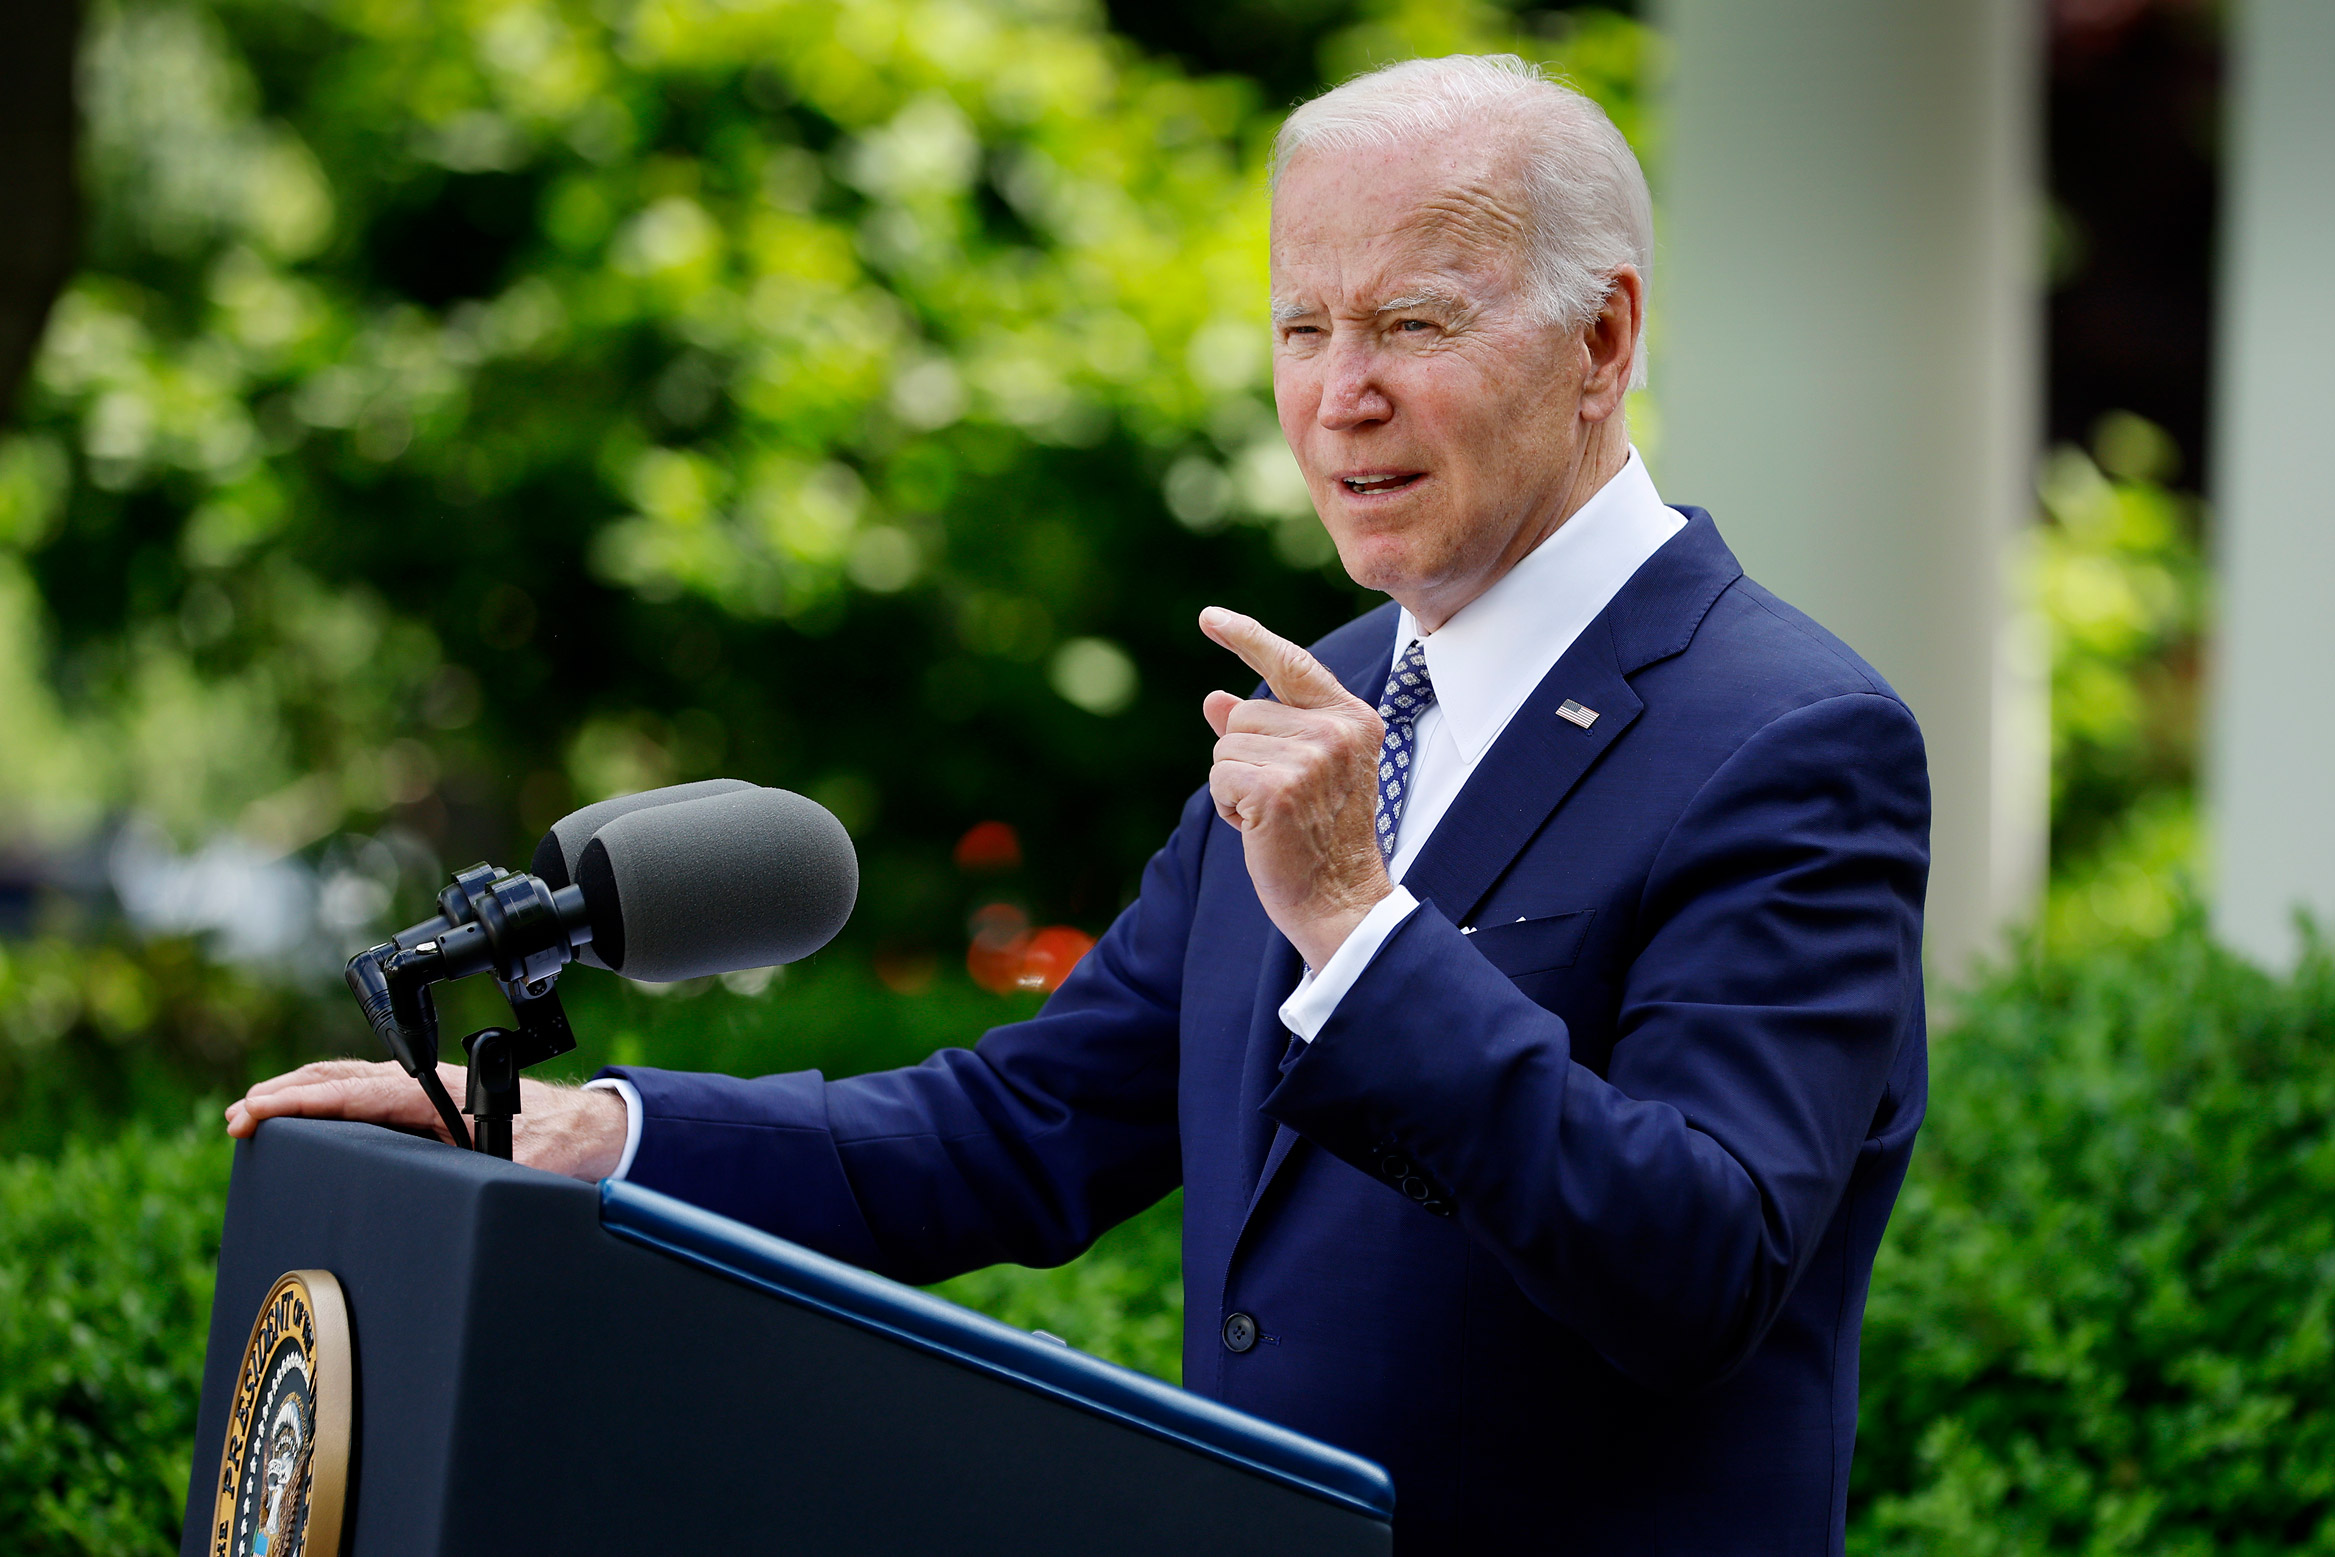 President Joe Biden delivers remarks while hosting a reception to celebrate Asian American, Native Hawaiian and Pacific Islander Heritage Month in the Rose Garden of the White House on May 17.